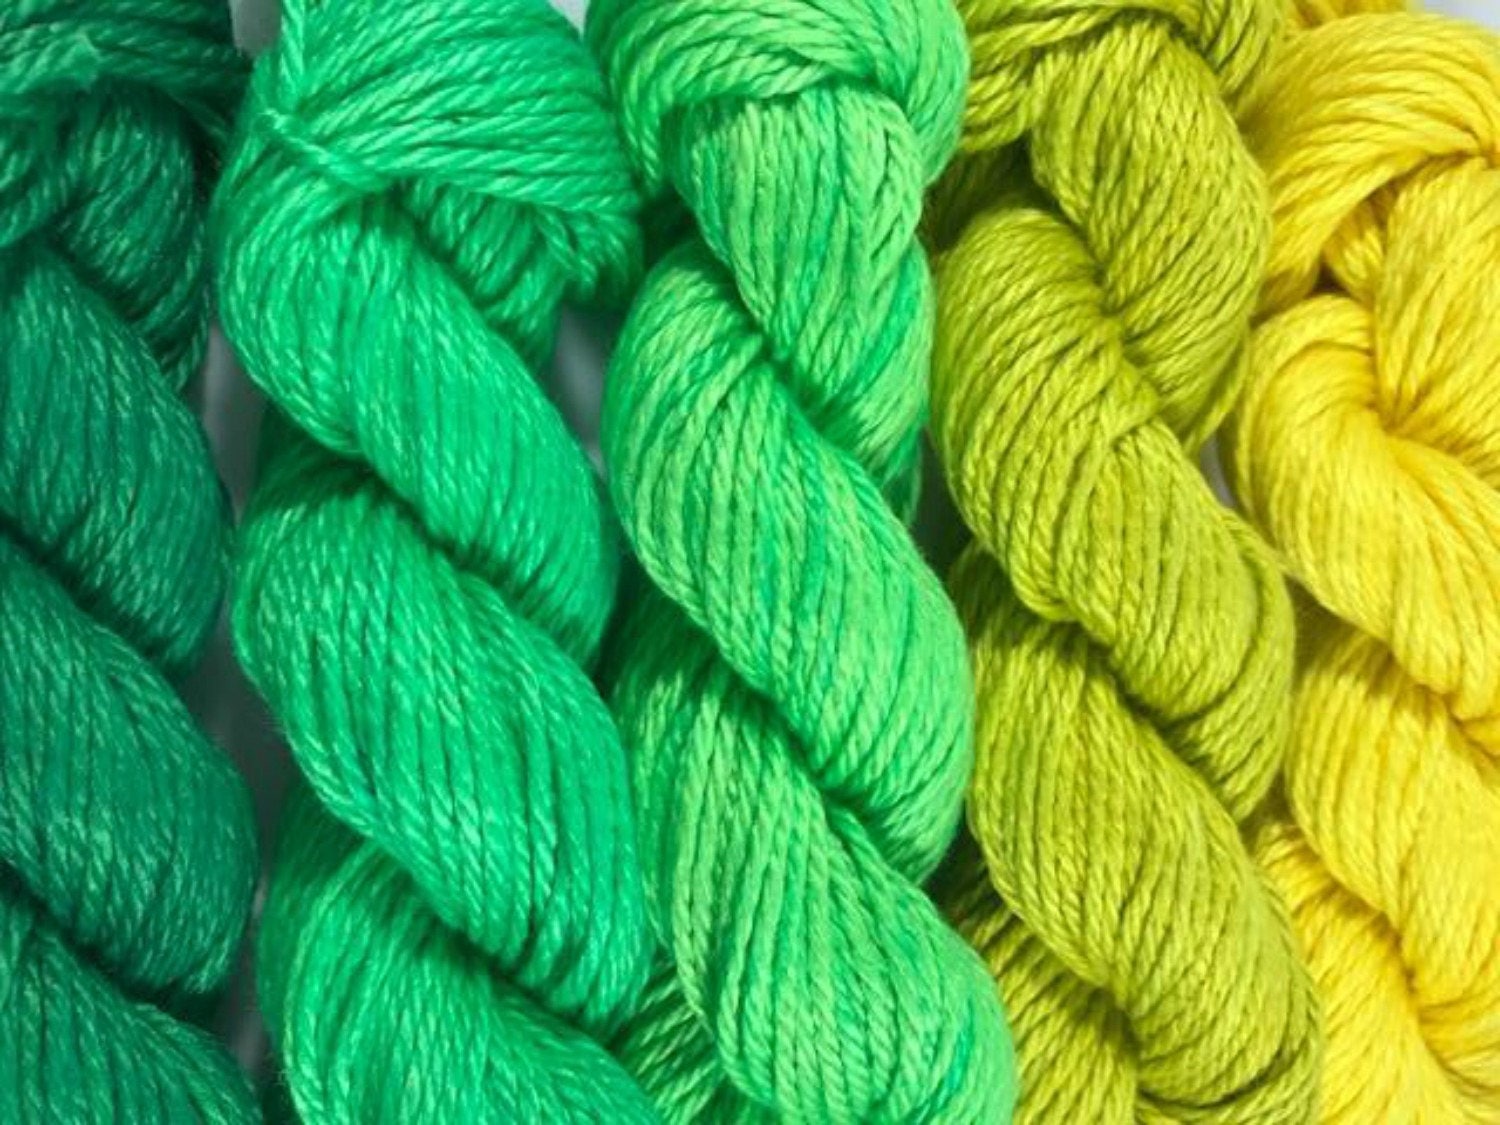 Hand Dyed Yarn - Yellow Green Gradient Kit - Semi Solids - Tonals - 3 Ply - Plant Based - DK Light Worsted - Bamboo Cotton - Soft Baby Yarn